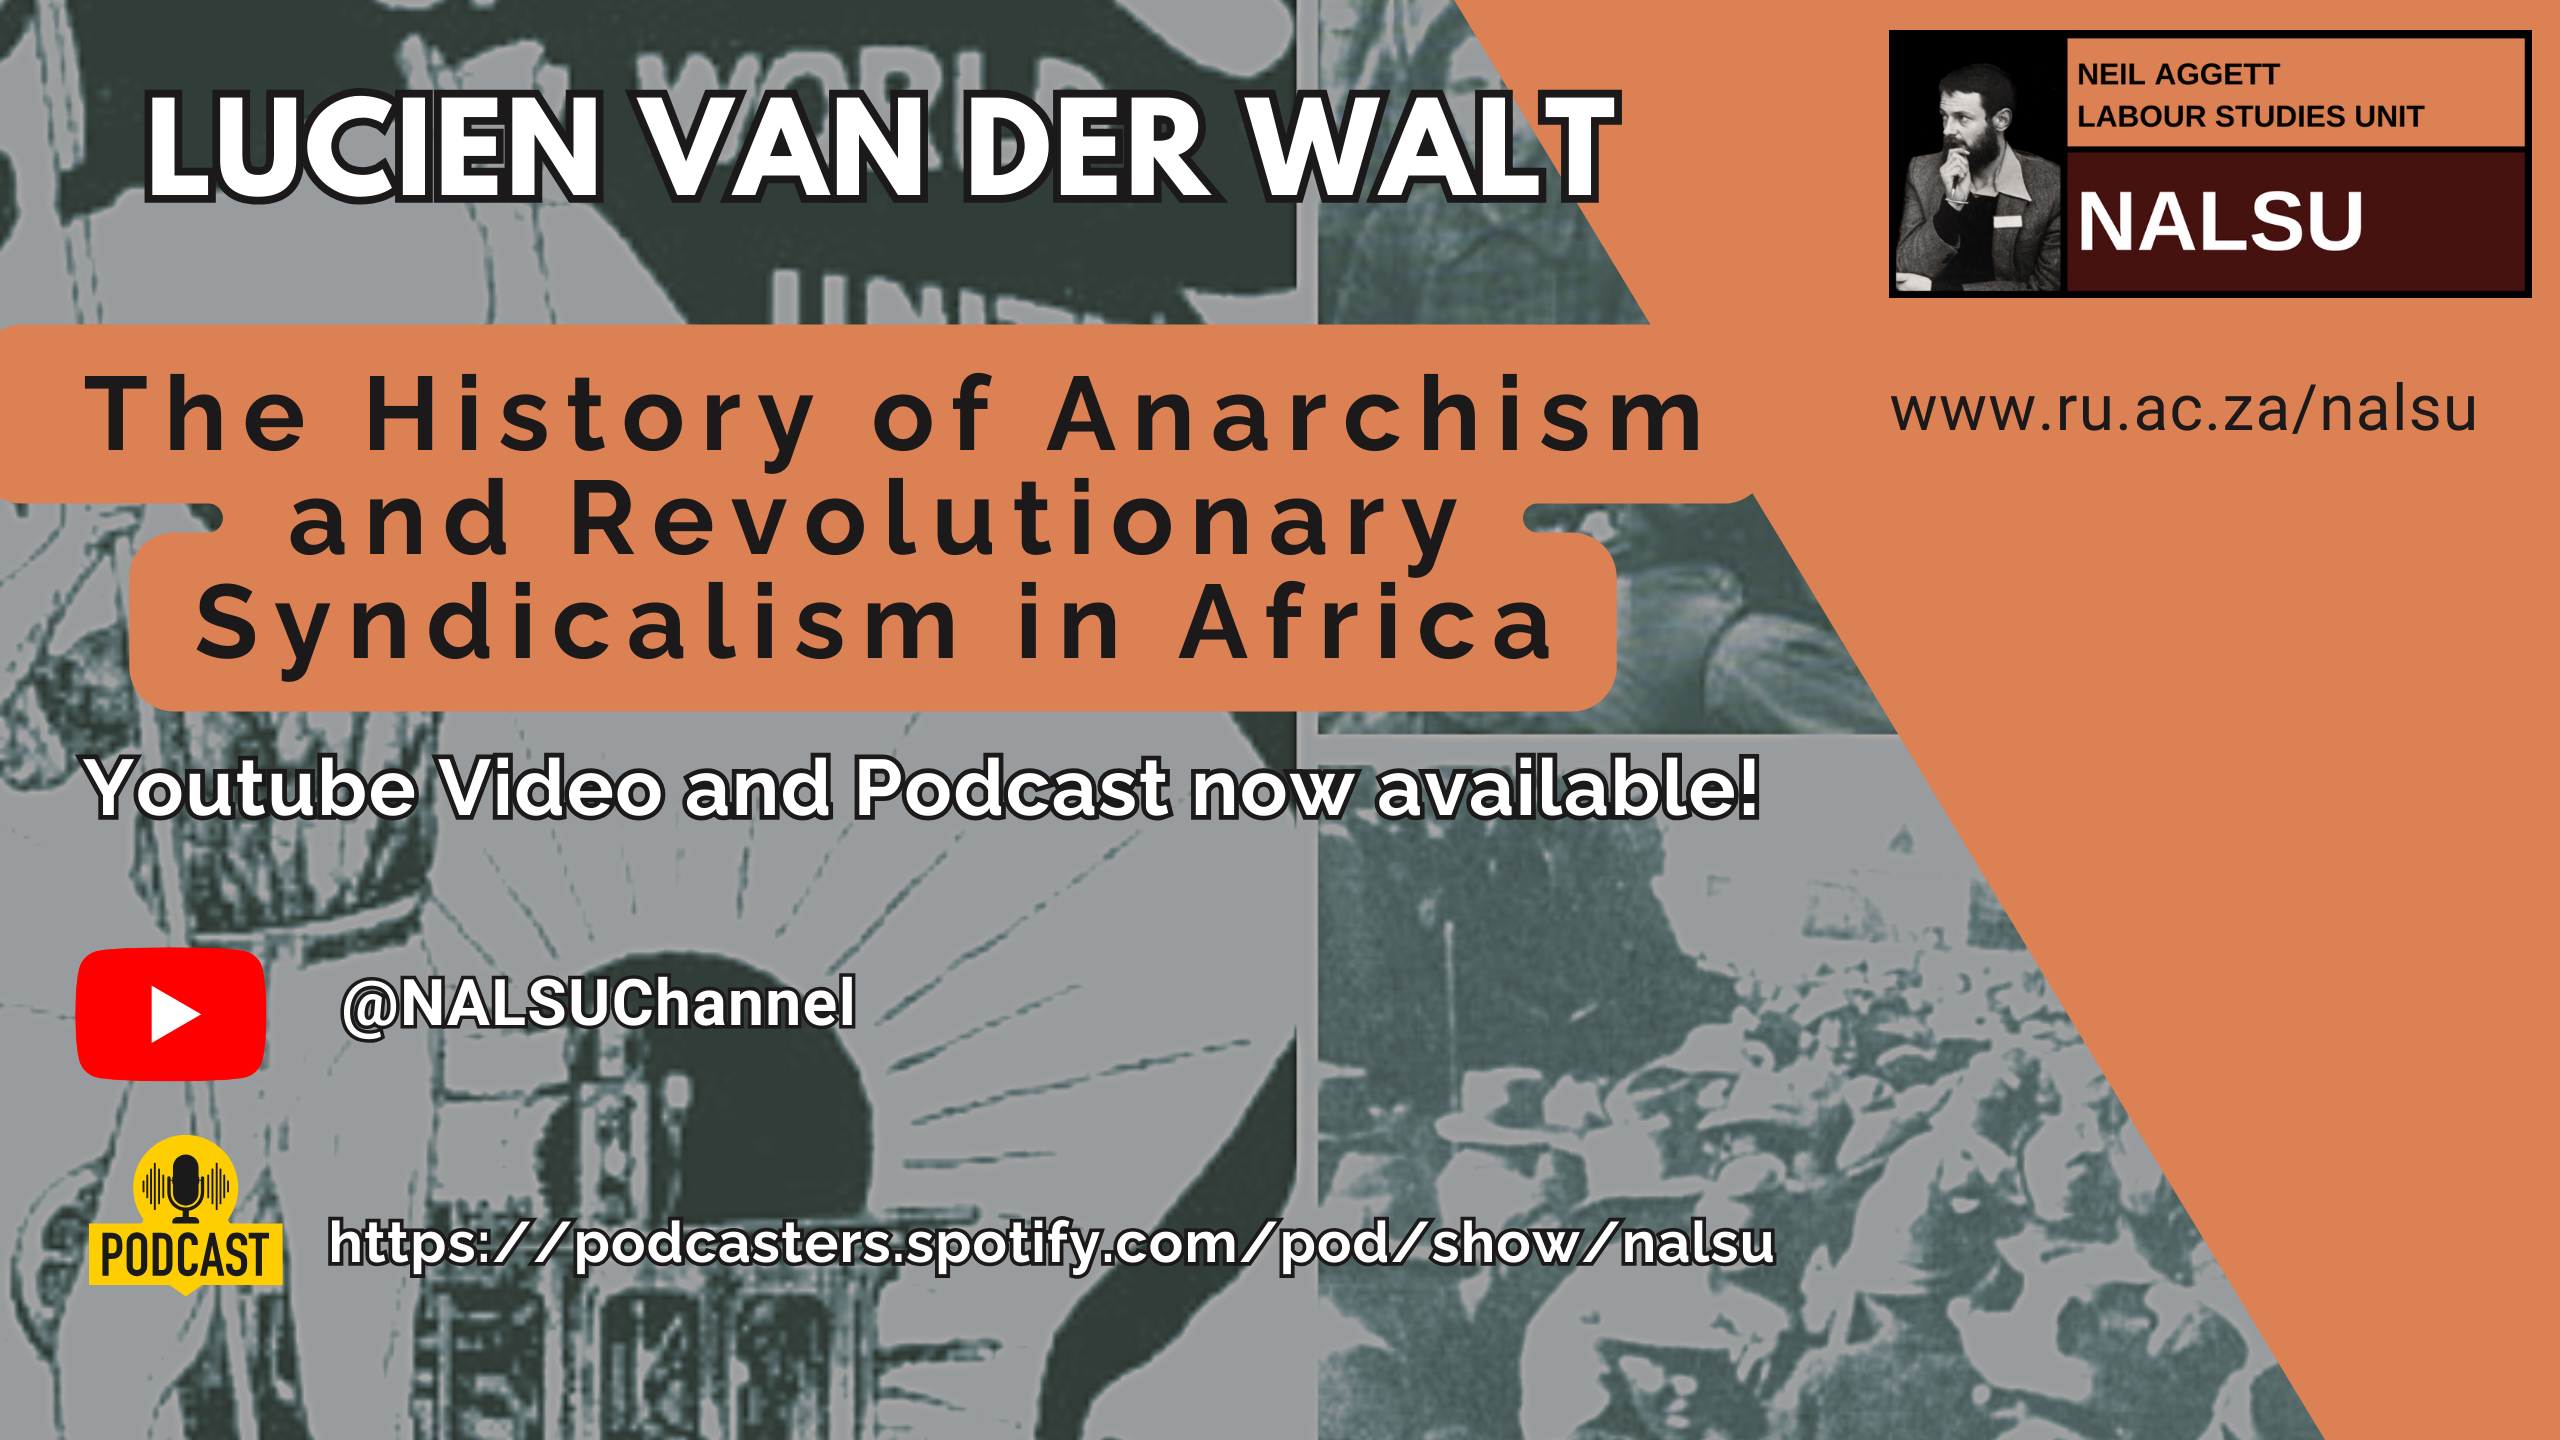 Anarchism and revolutionary syndicalism in Africa